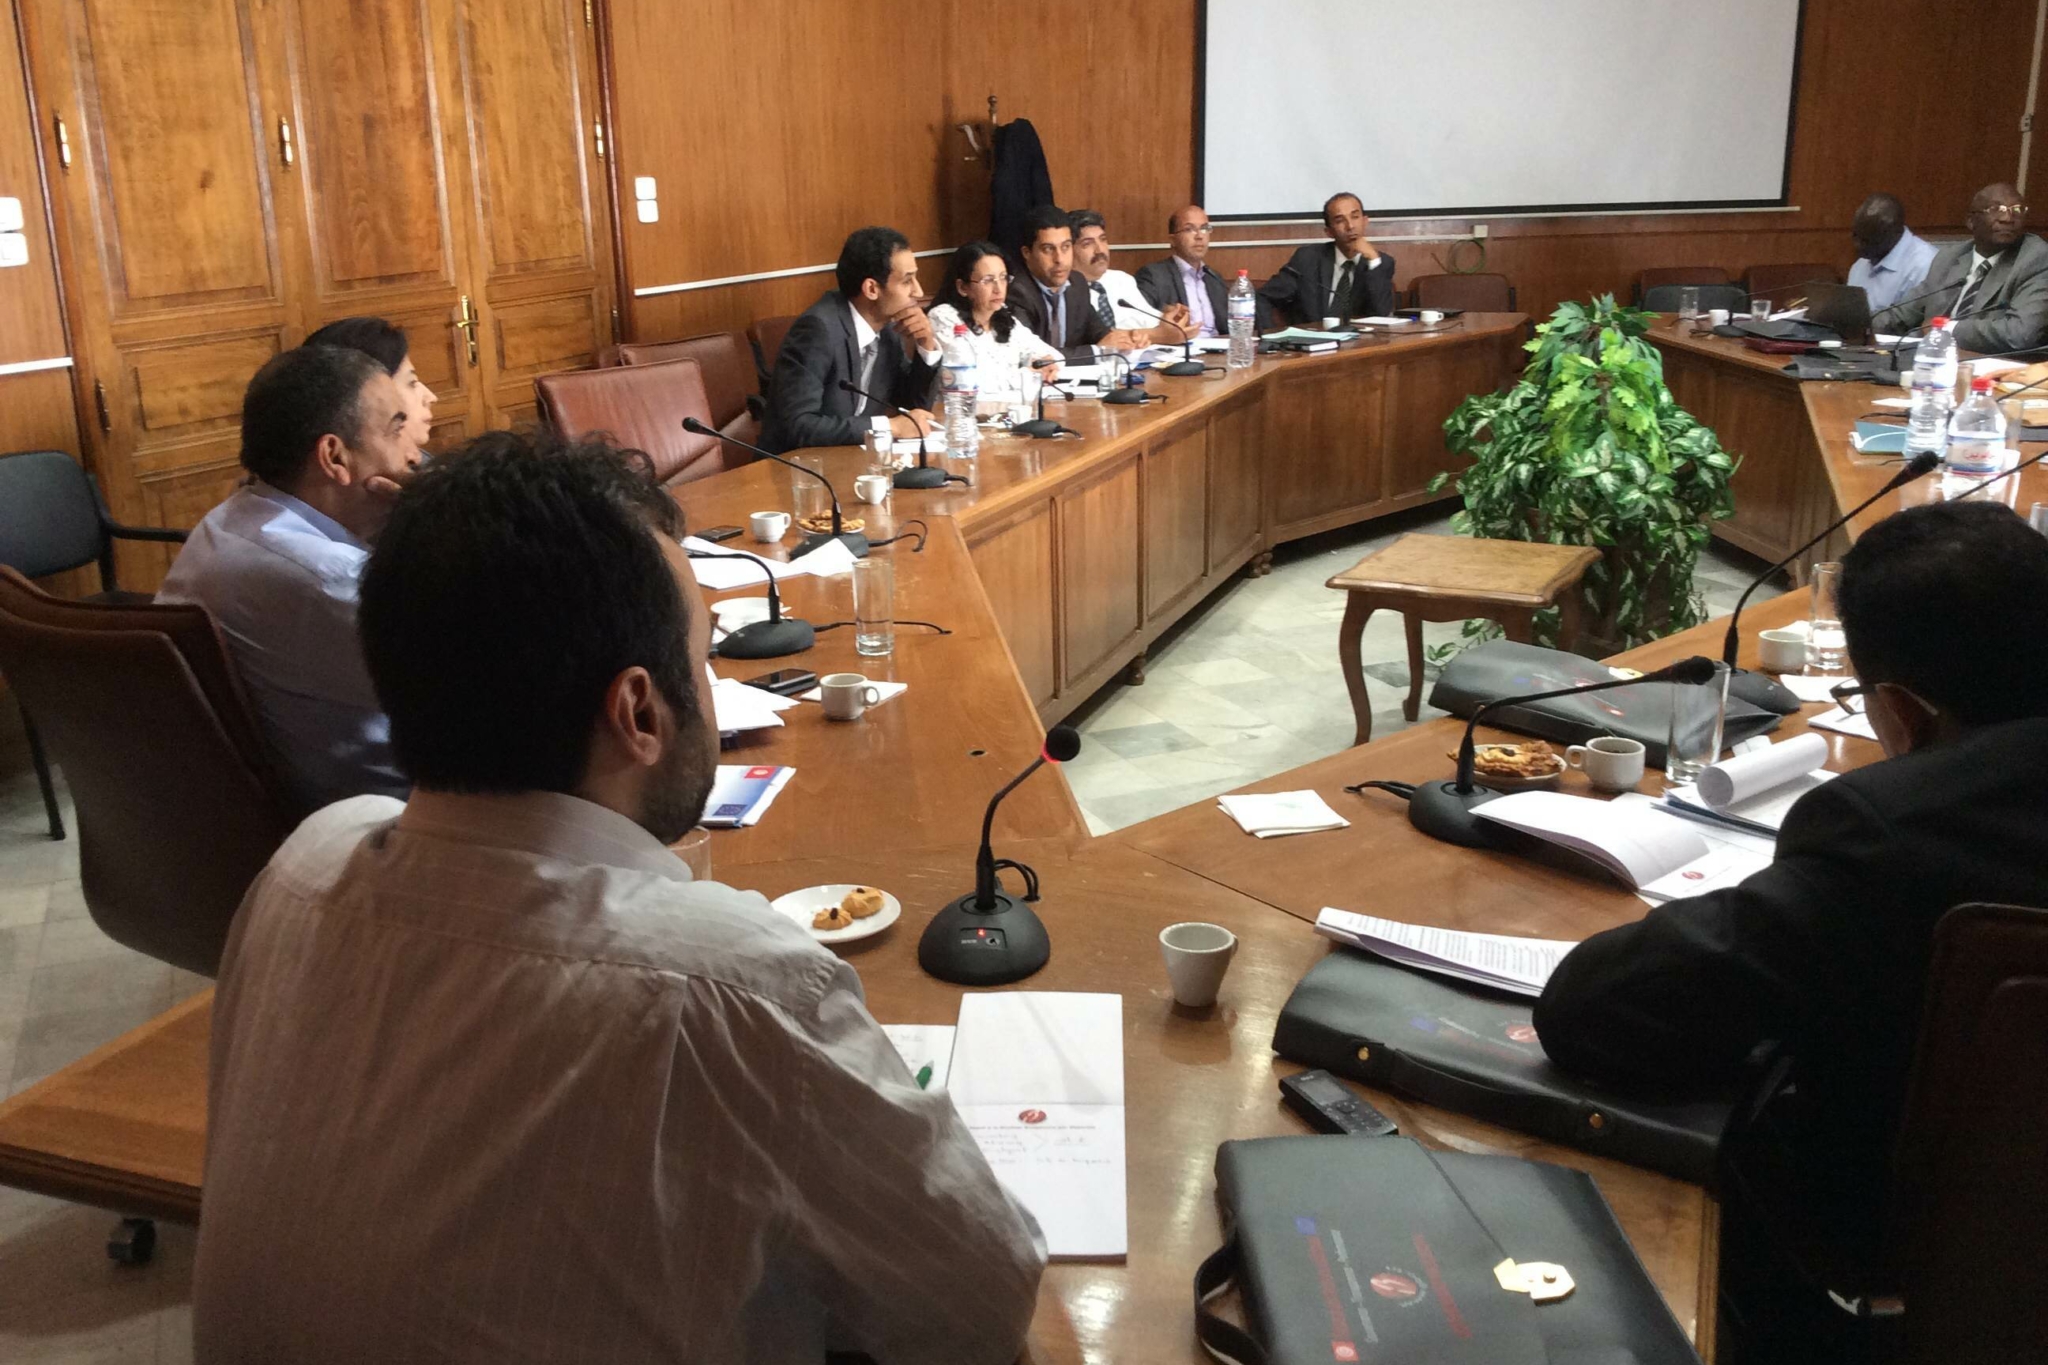 Images Blog Strengthening Fiscal Transparency And Participation In Post Revolution Tunisia